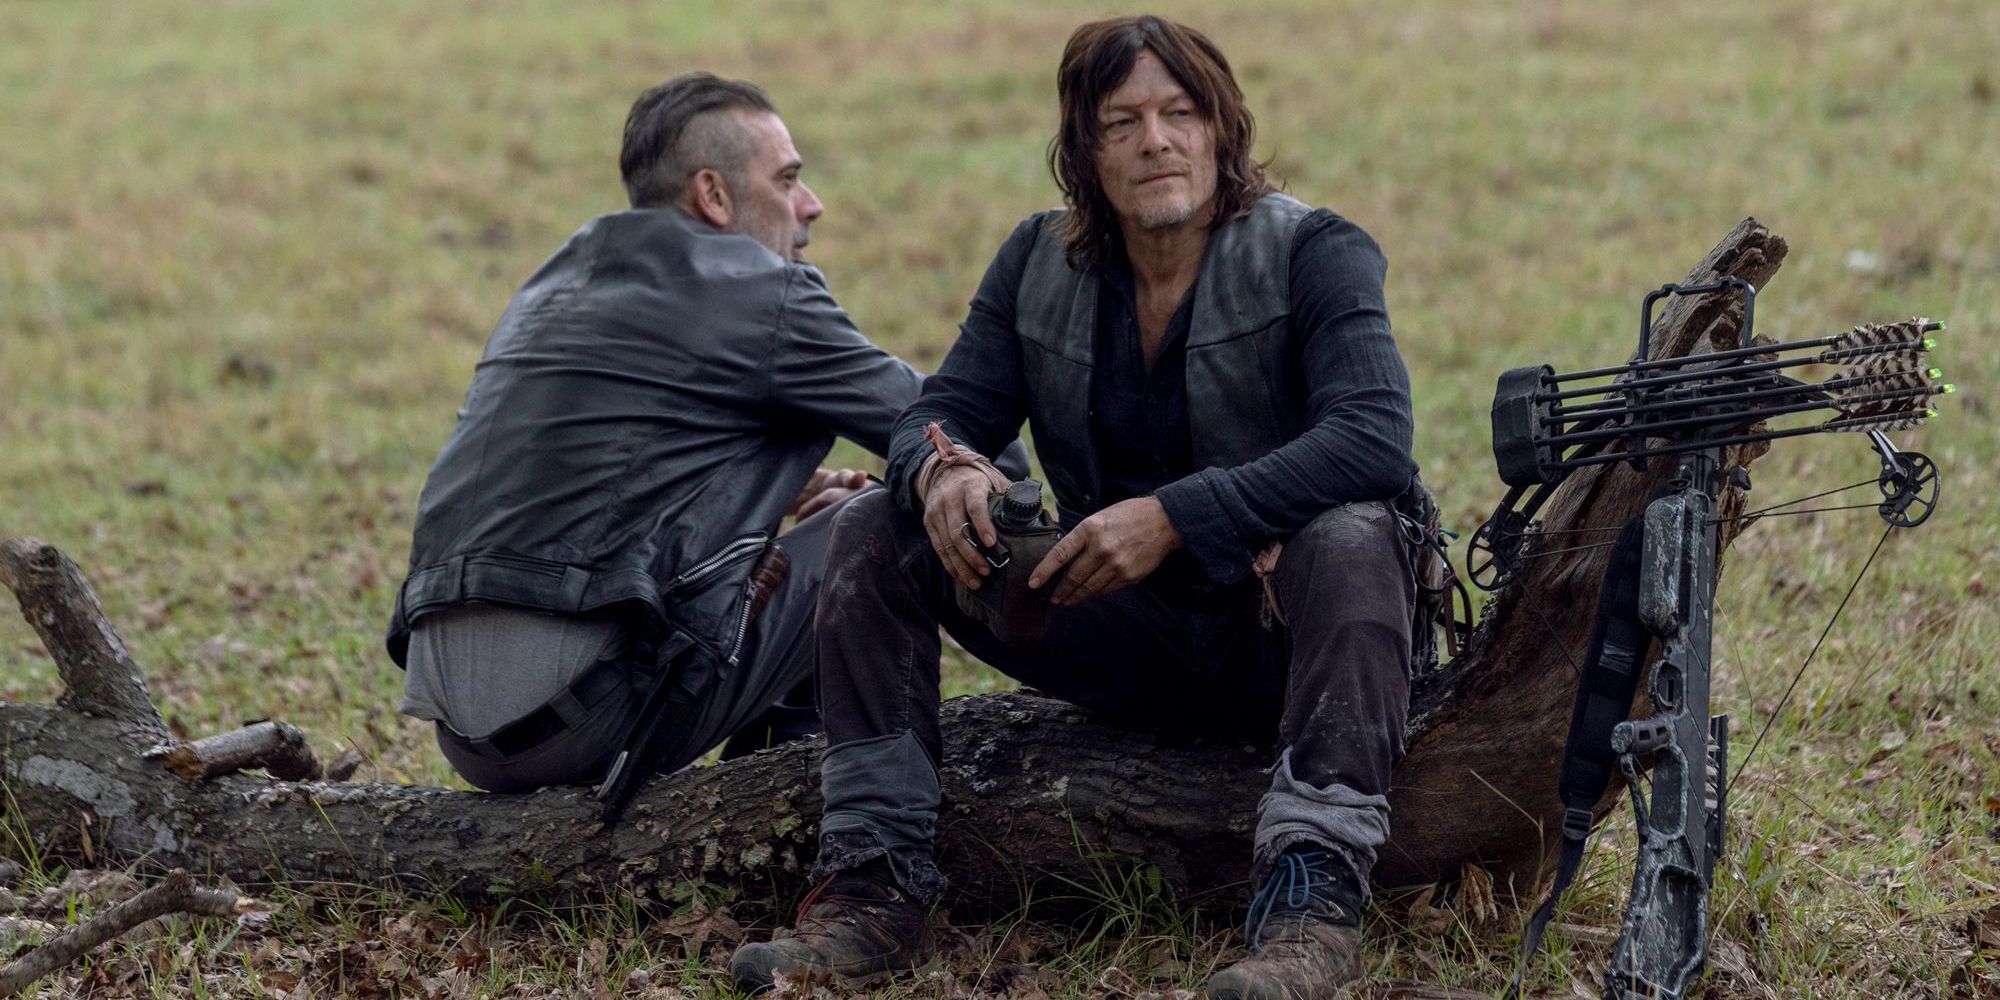 Daryl and Negan in The Walking Dead